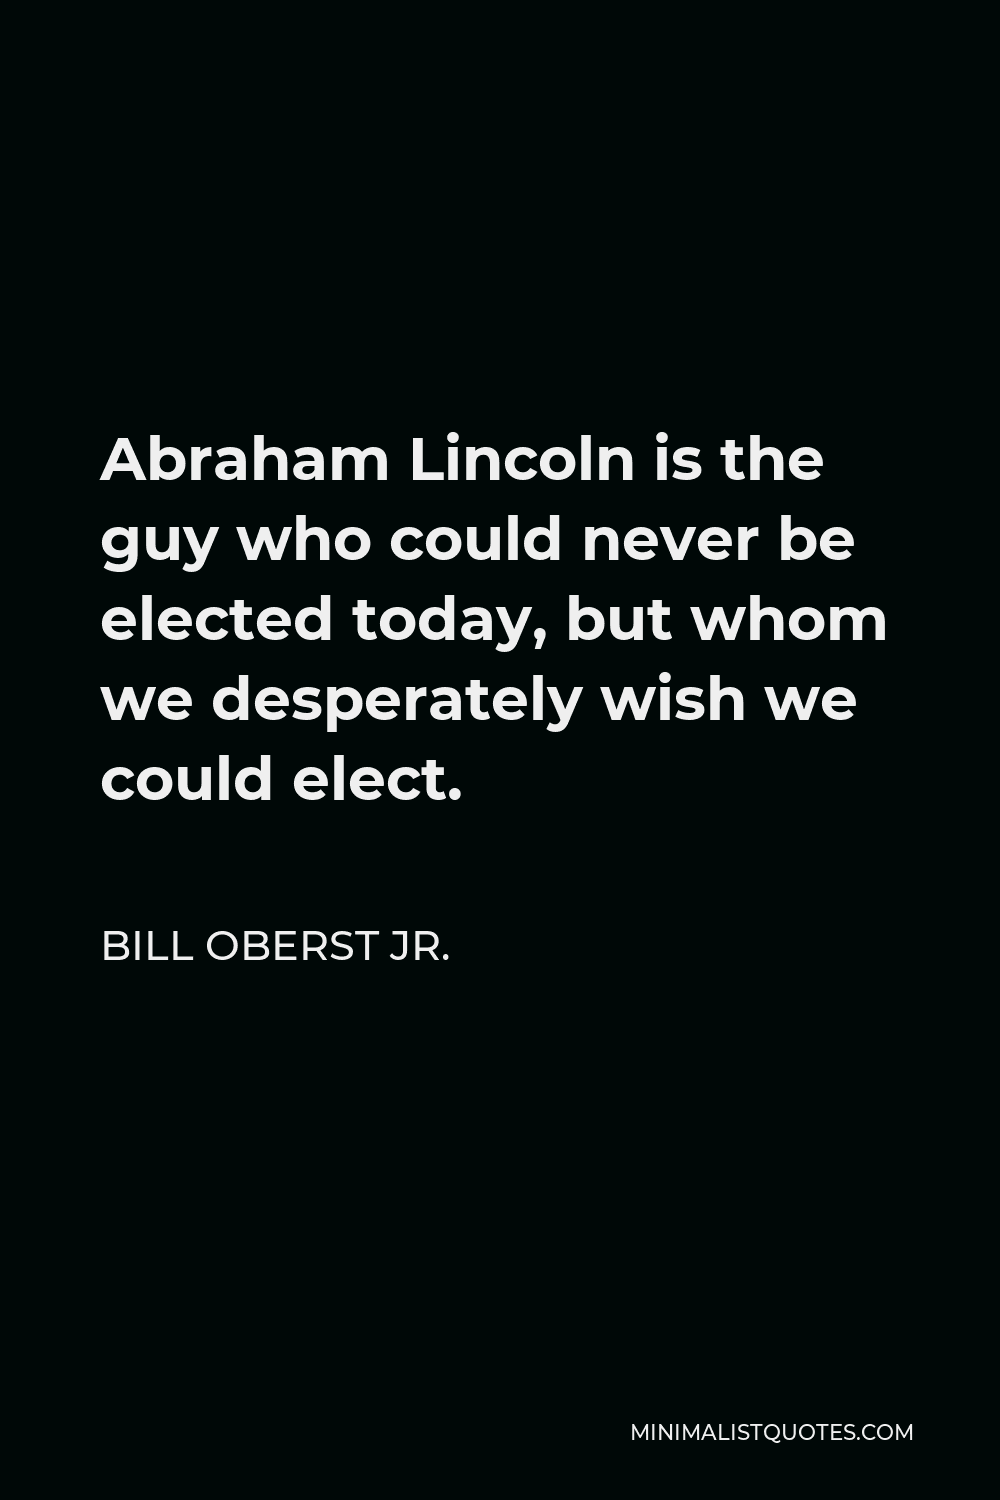 Bill Oberst Jr. Quote - Abraham Lincoln is the guy who could never be elected today, but whom we desperately wish we could elect.